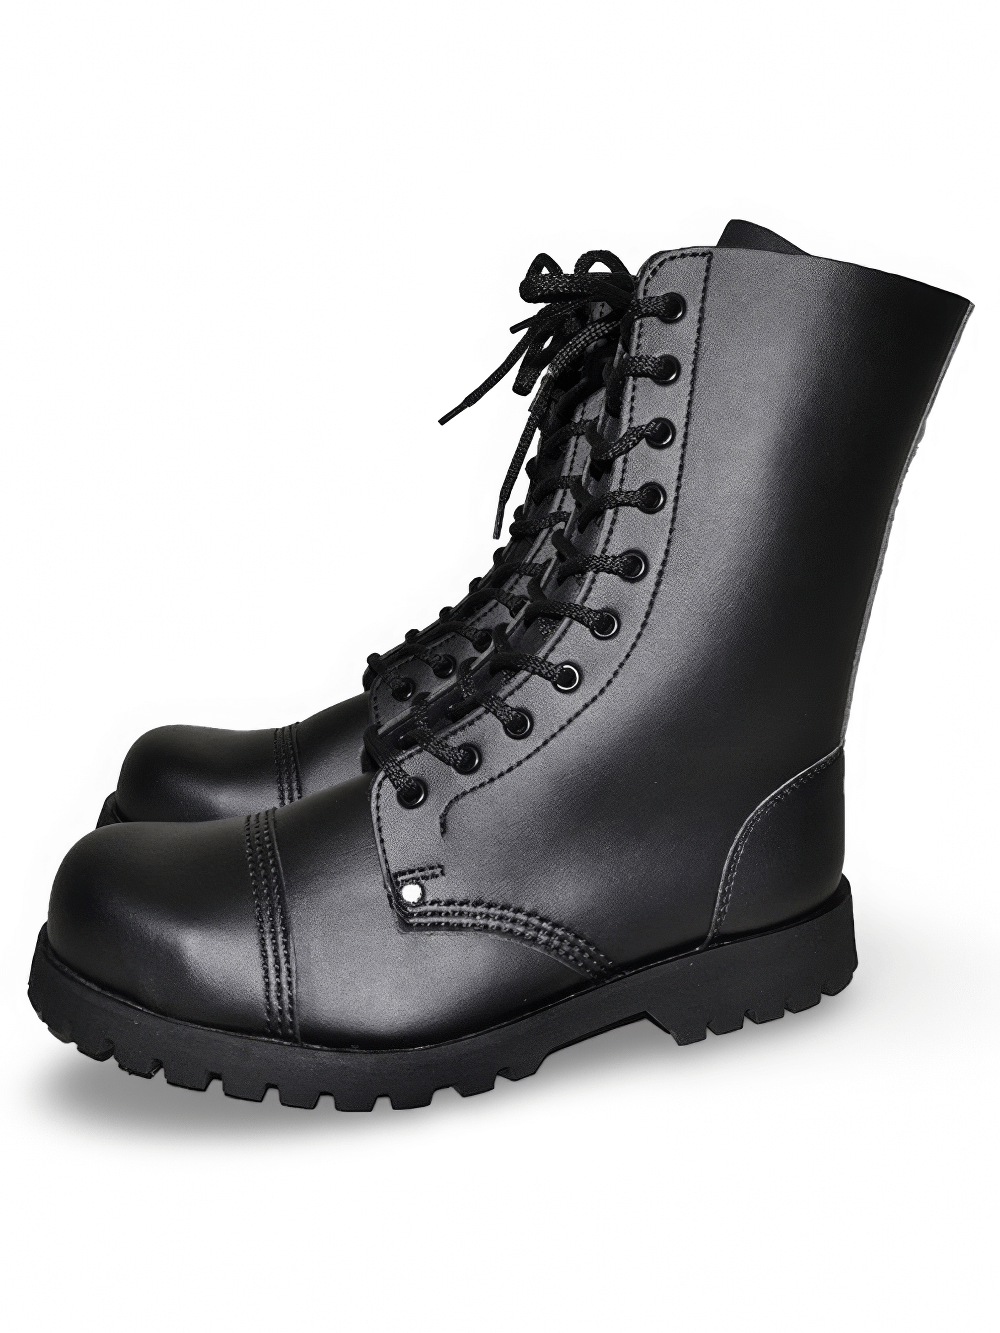 Unisex Black Steel-Toe Boots with Lace-Up Closure